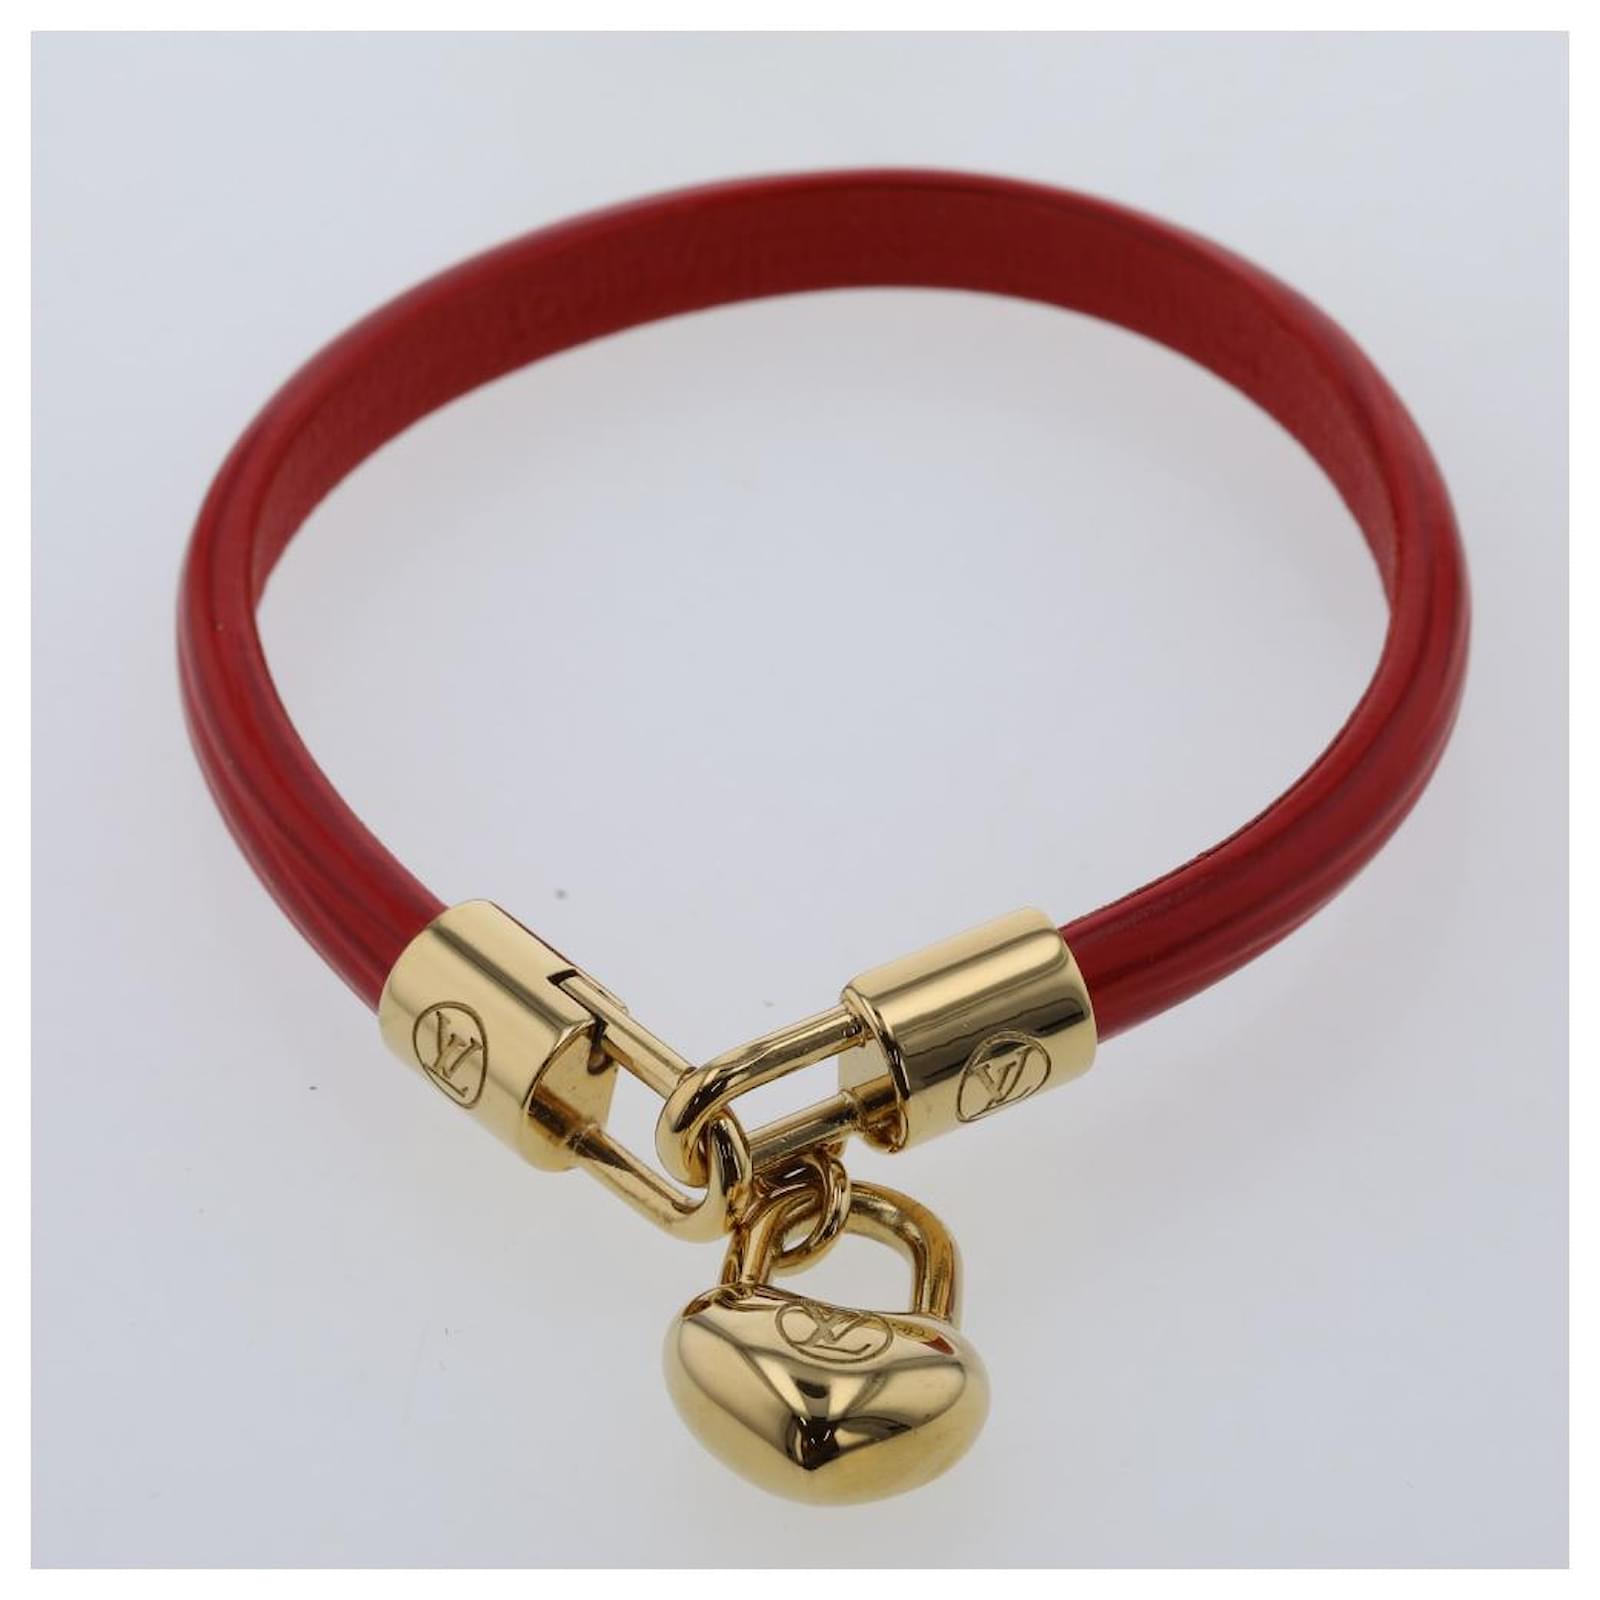 Louis Vuitton Leather Crazy in Lock Charm Bracelet M6450 Red Pony